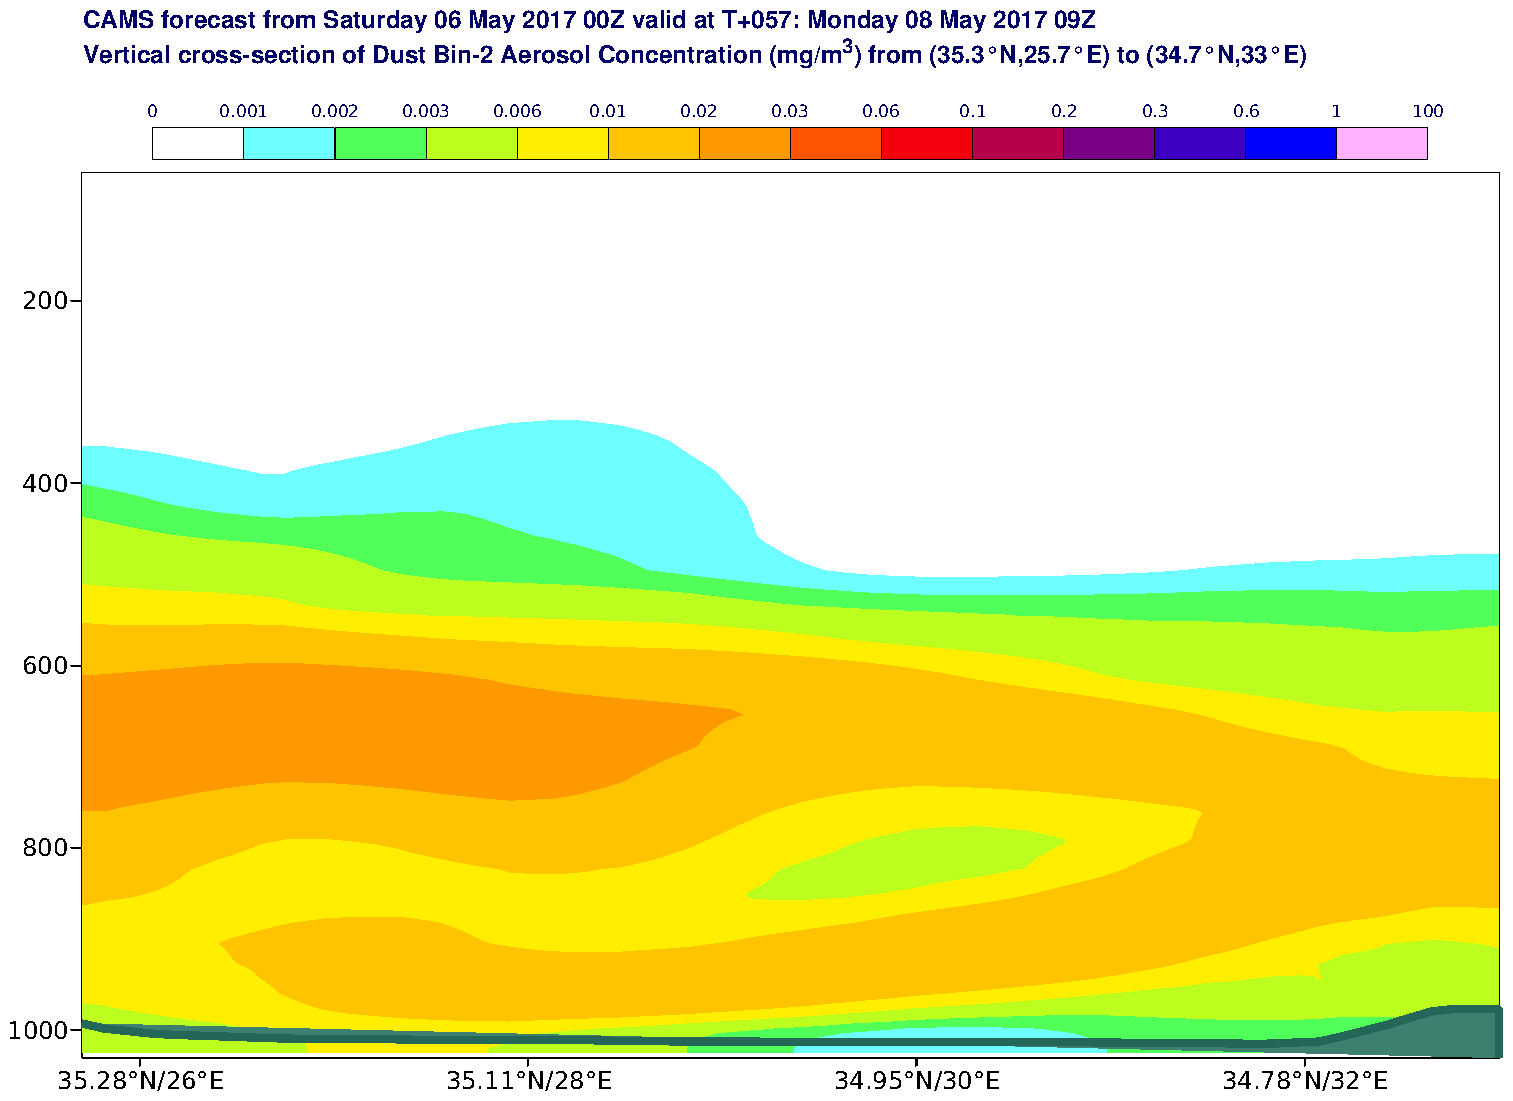 Vertical cross-section of Dust Bin-2 Aerosol Concentration (mg/m3) valid at T57 - 2017-05-08 09:00